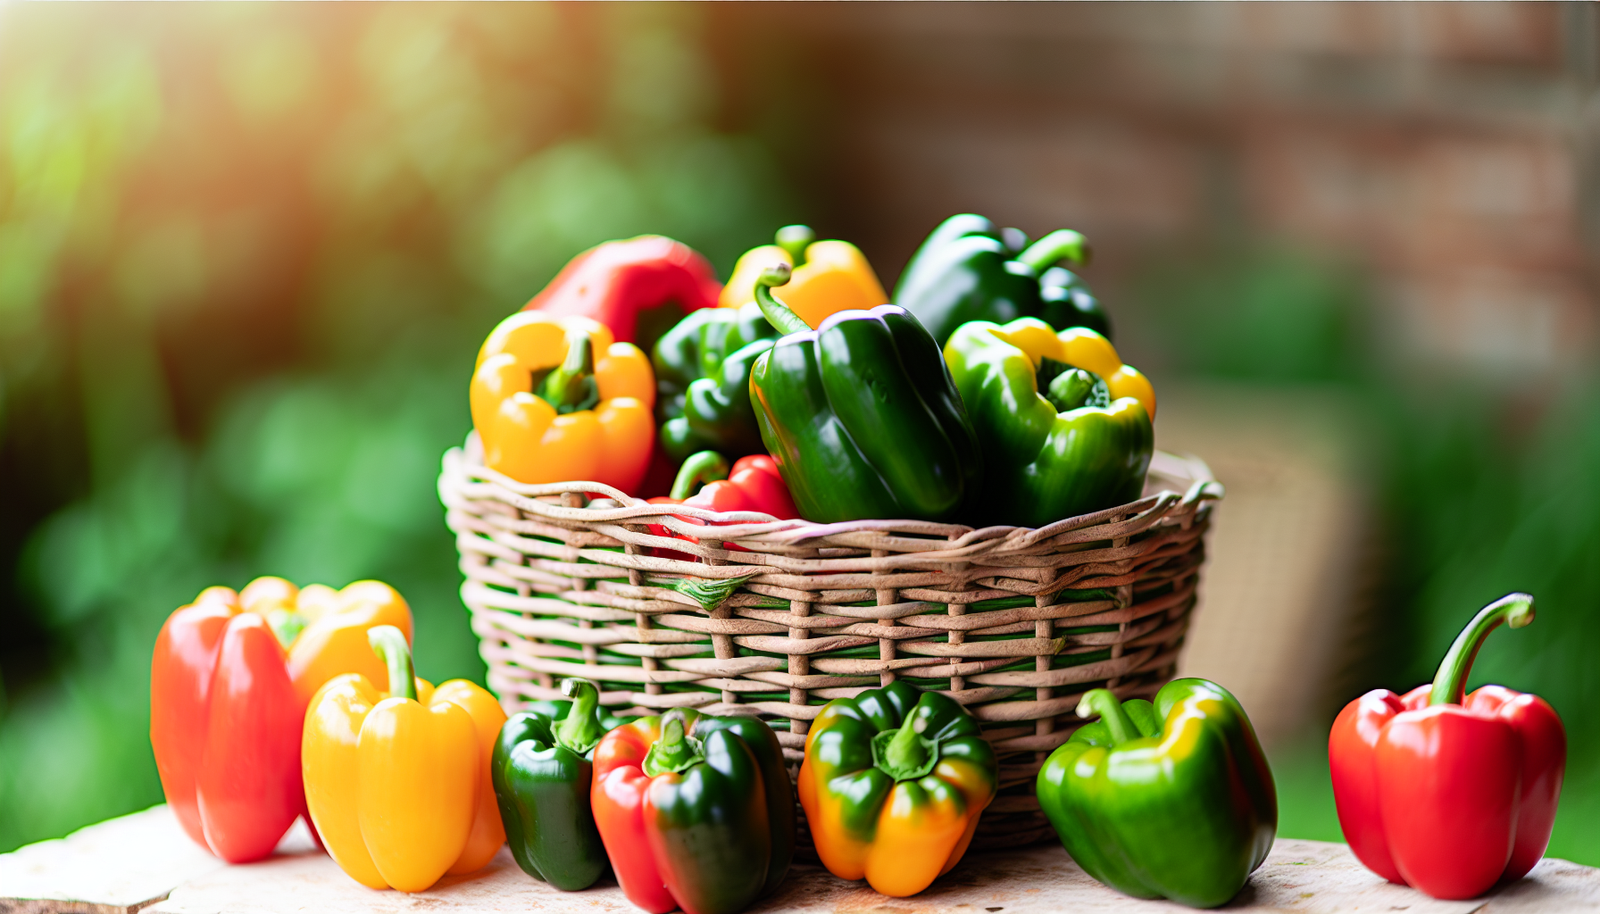 A selection of bell peppers in different colors arranged in a basket